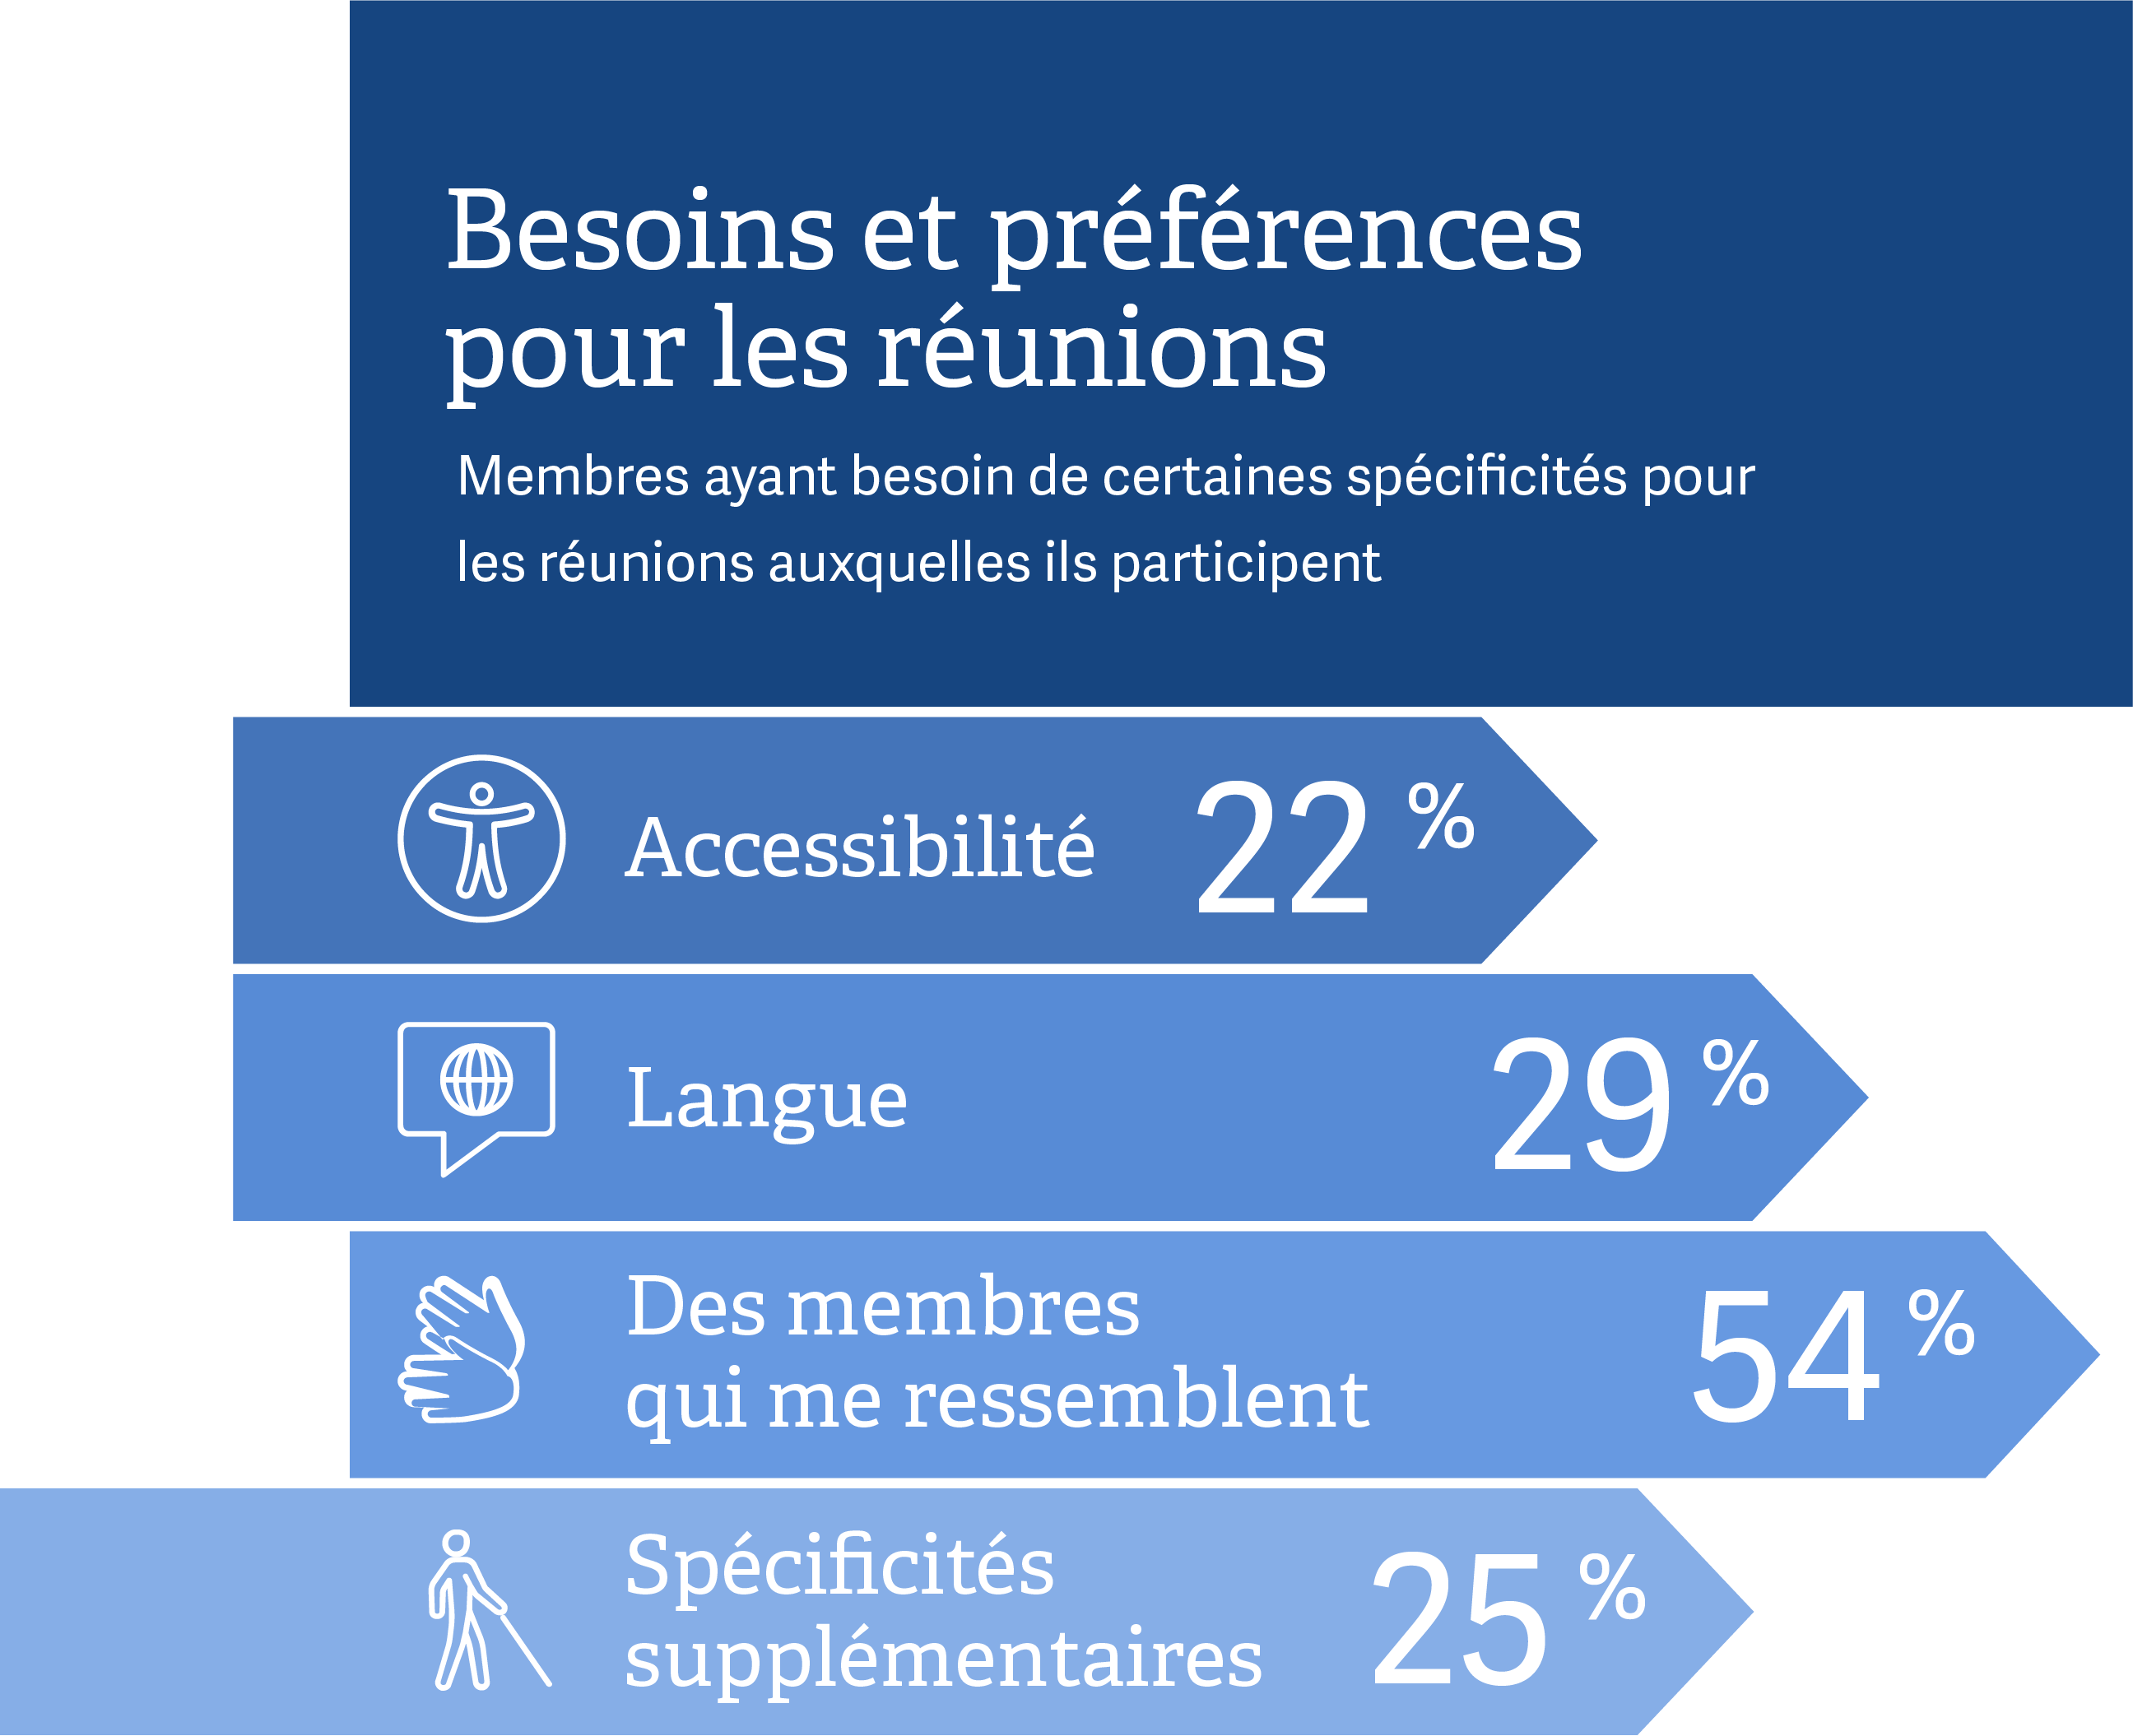 mobile french preferences image graphic